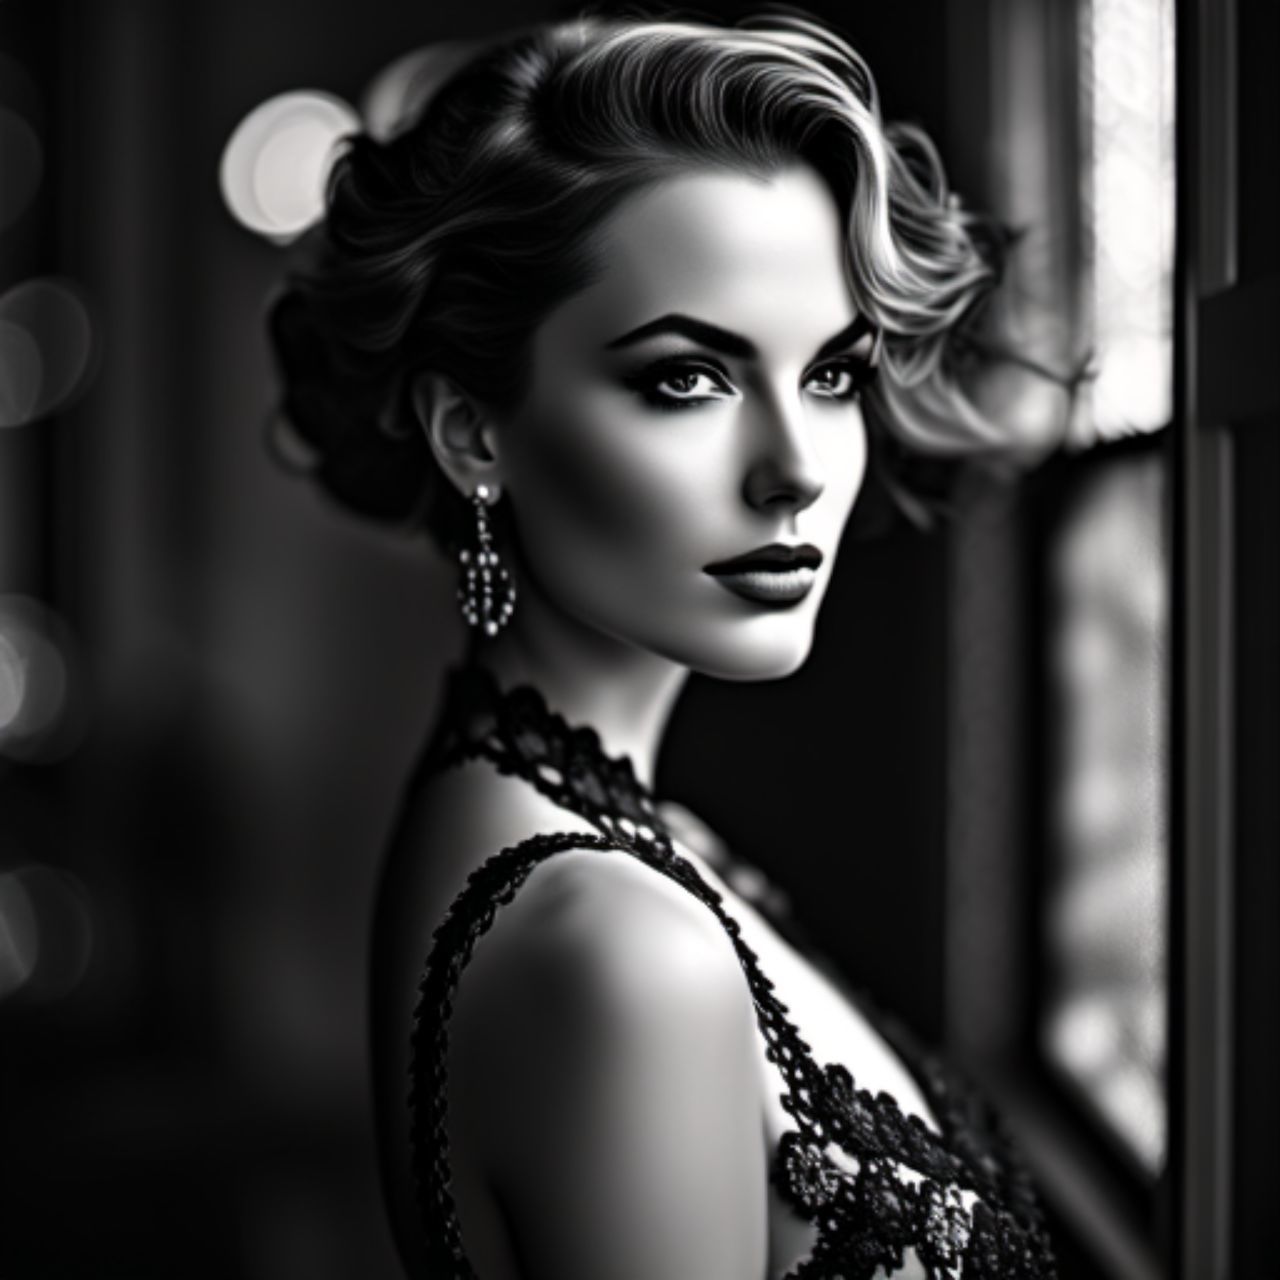 fashion, women, elegance, adult, black and white, portrait, glamour, one person, young adult, monochrome photography, luxury, female, jewelry, make-up, wealth, haute couture, hairstyle, monochrome, shiny, clothing, human face, fine art portrait, necklace, dress, retro styled, looking at camera, perfection, indoors, beauty product, arts culture and entertainment, cool attitude, photo shoot, desire, black, cute, studio shot, pearl jewelry, beauty in nature, dark, curly hair, blond hair, high society, earring